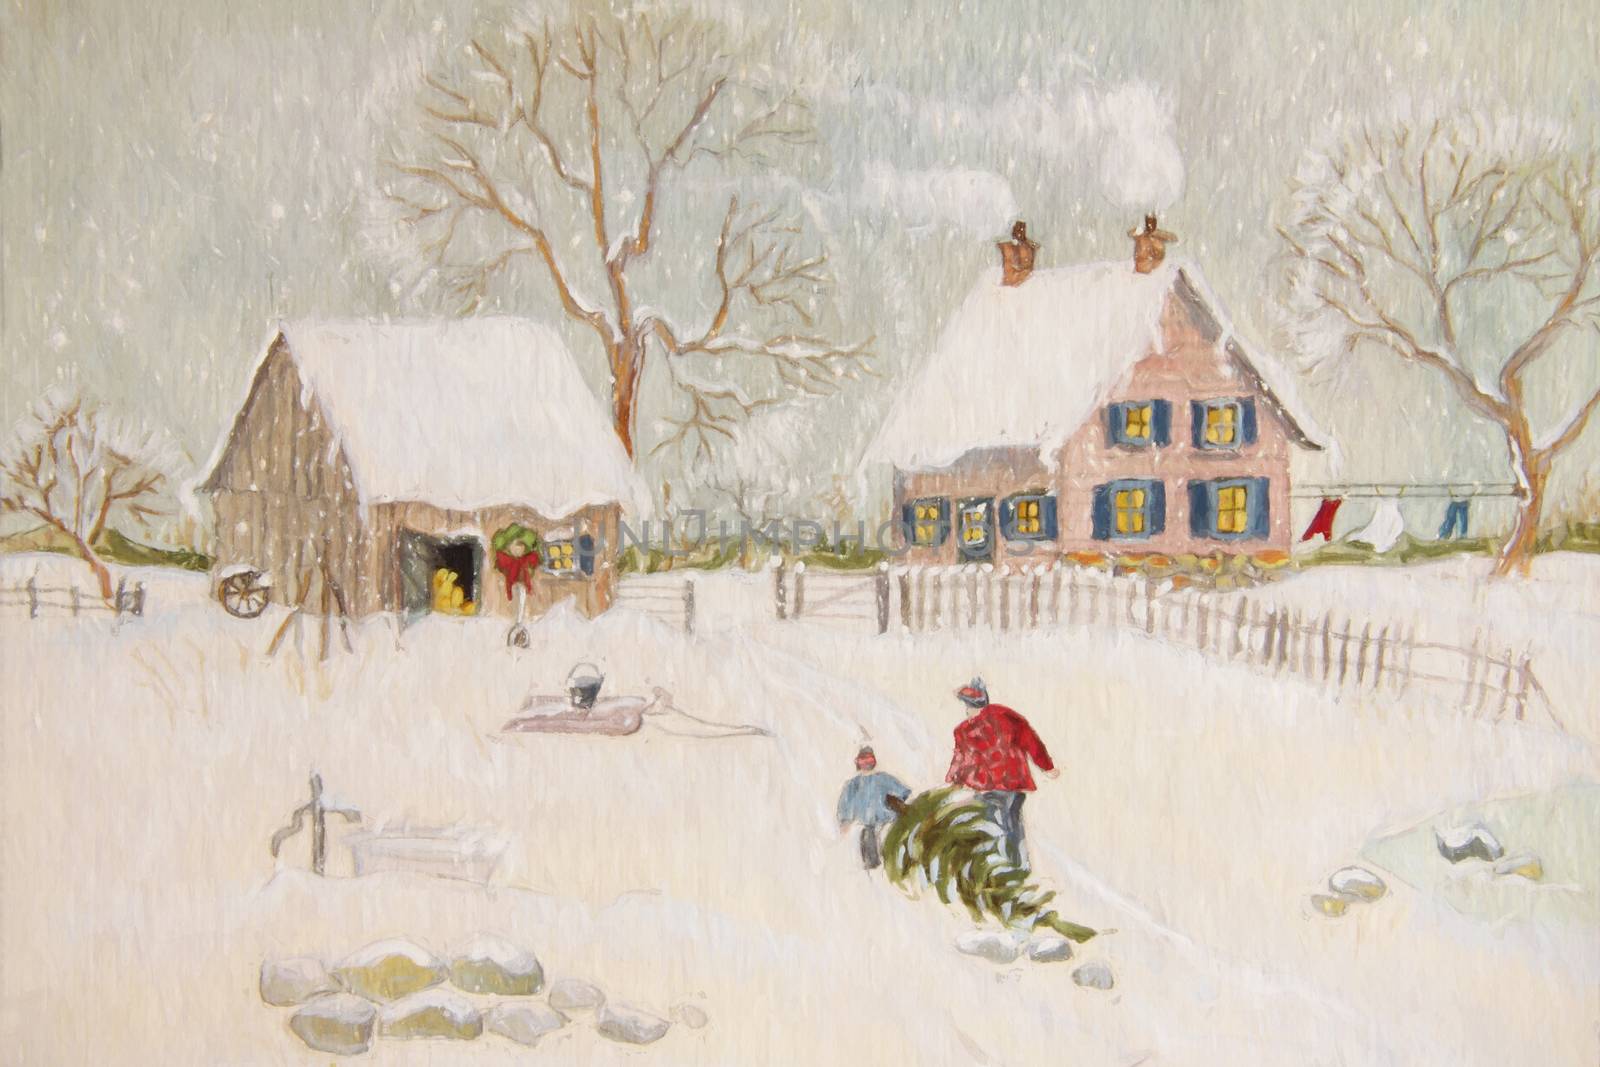 Winter scene of a farm with people, digitally altered by Sandralise